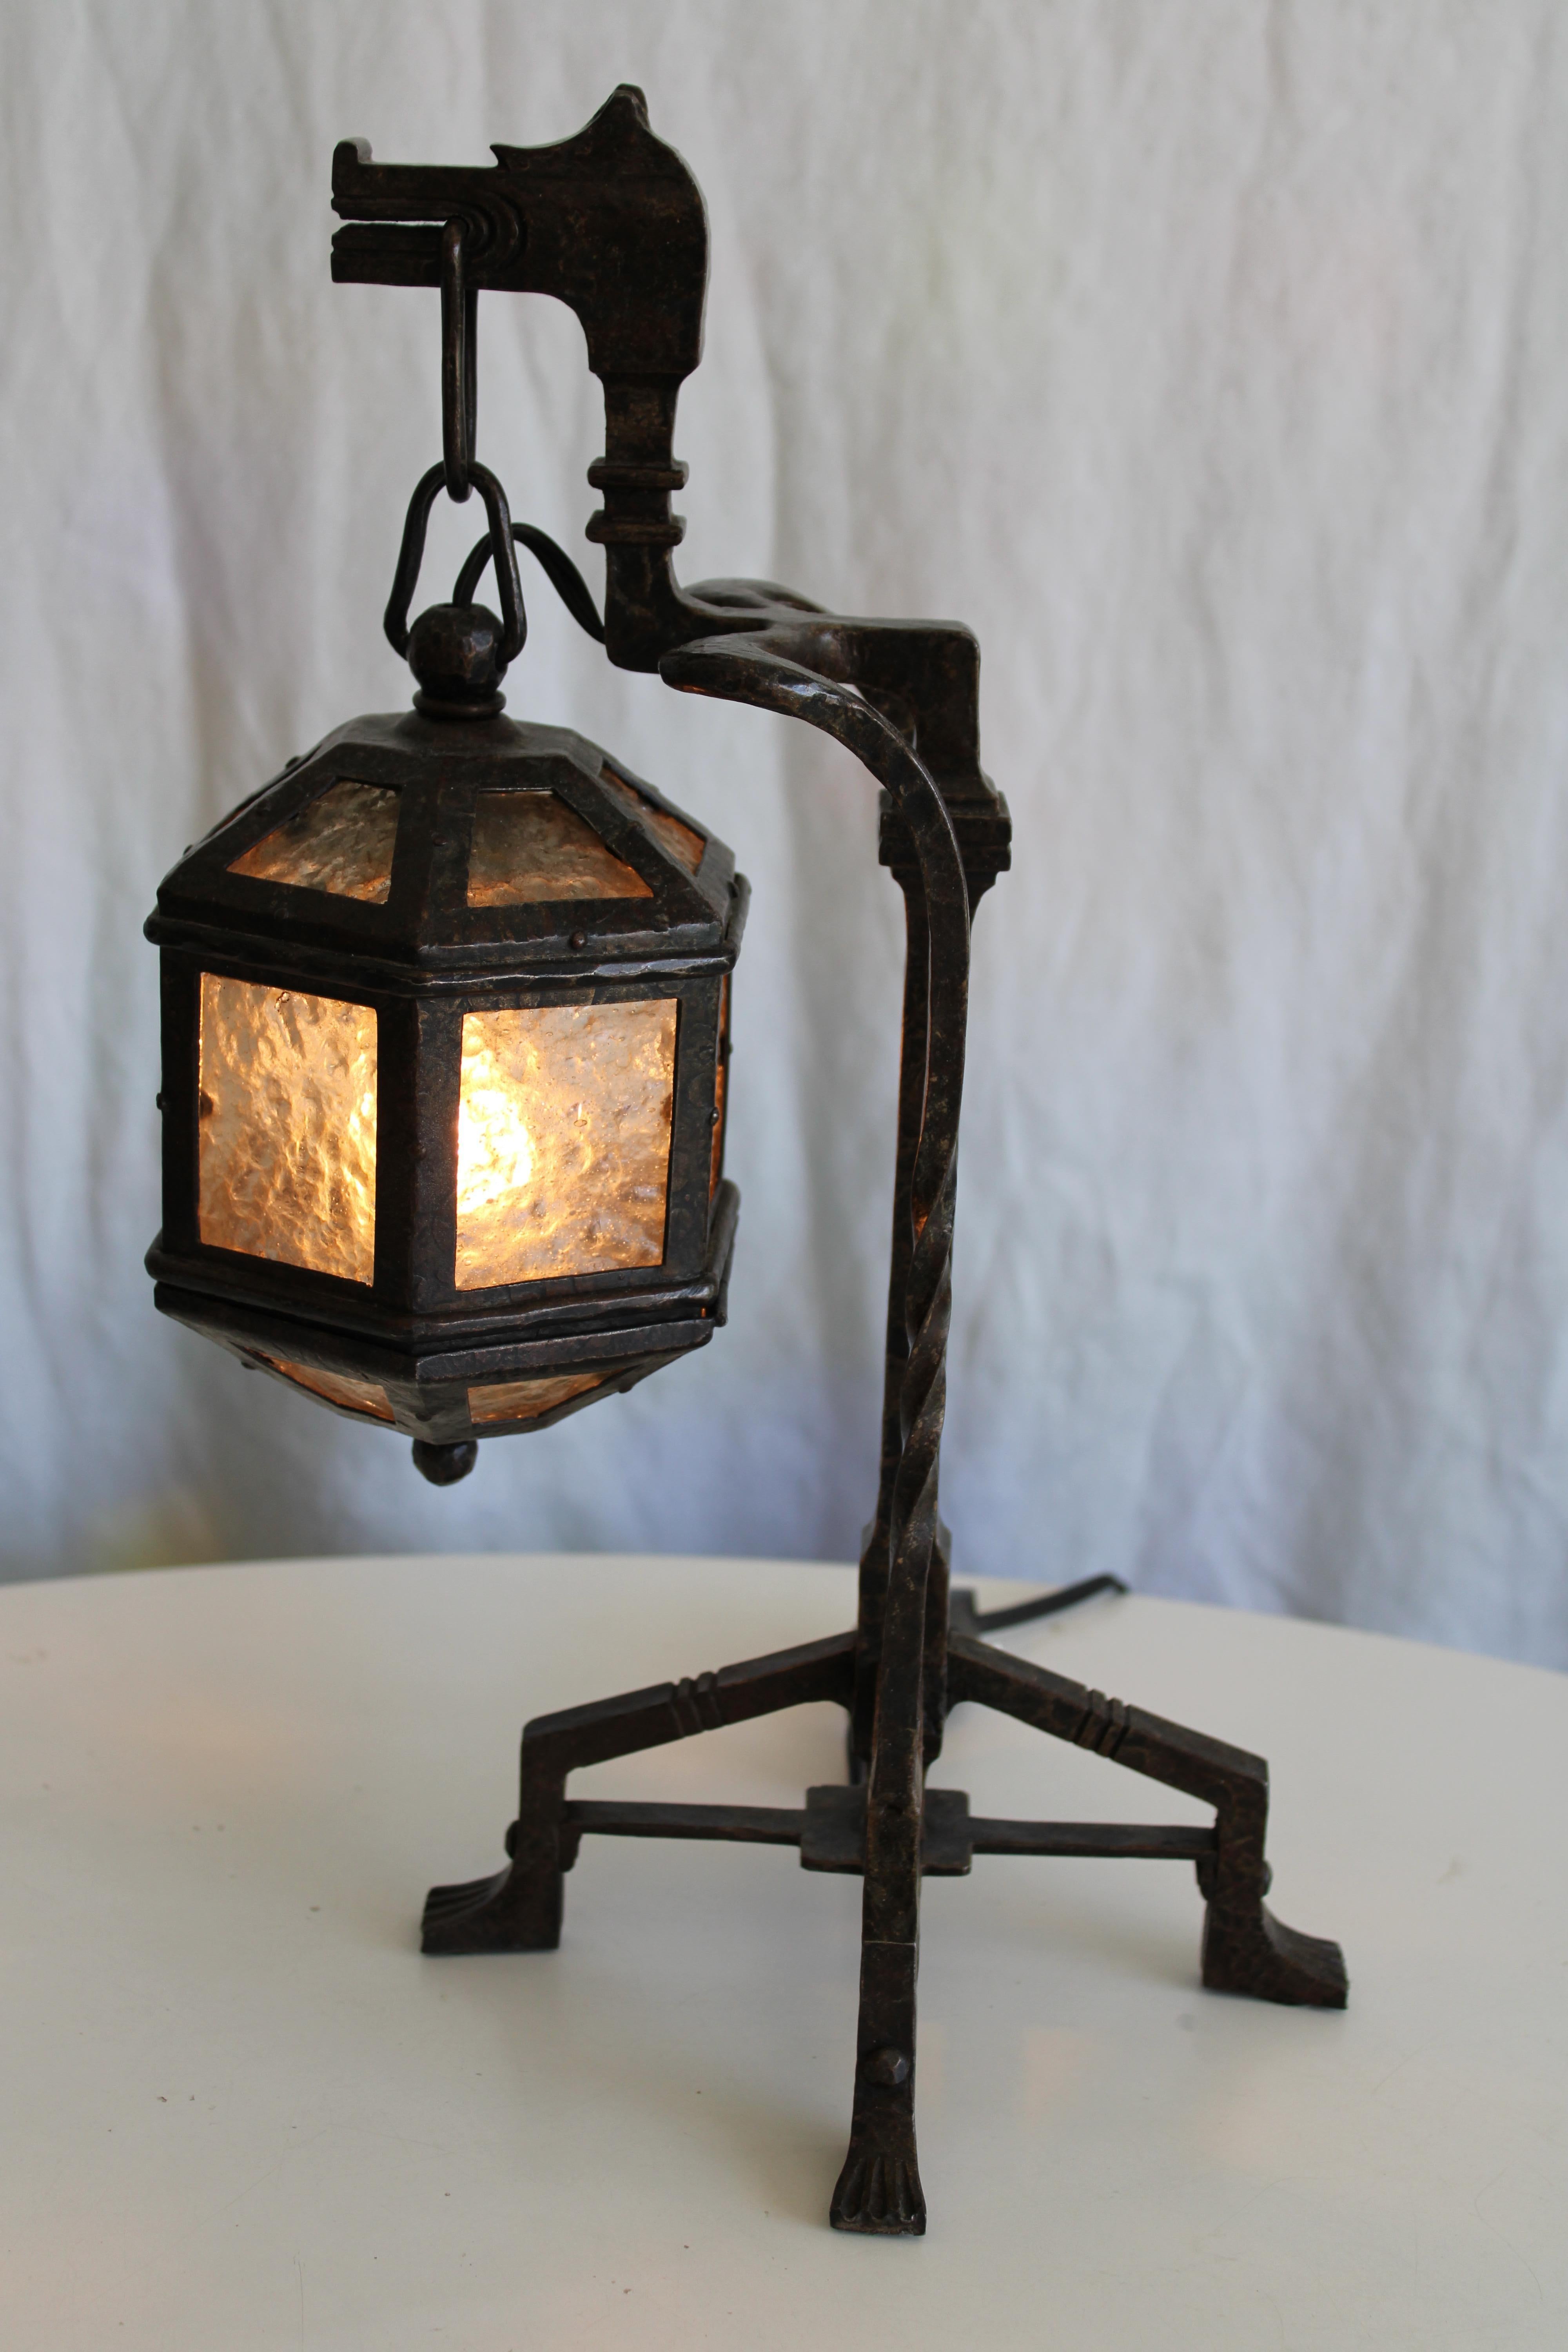 An early twentieth century hand wrought iron table lamp in the abstracted form of a dragon. Lamp is entirely and exquisitely hand crafted. Lantern has eighteen panes of hammered glass, all original. The lamp is 9.5